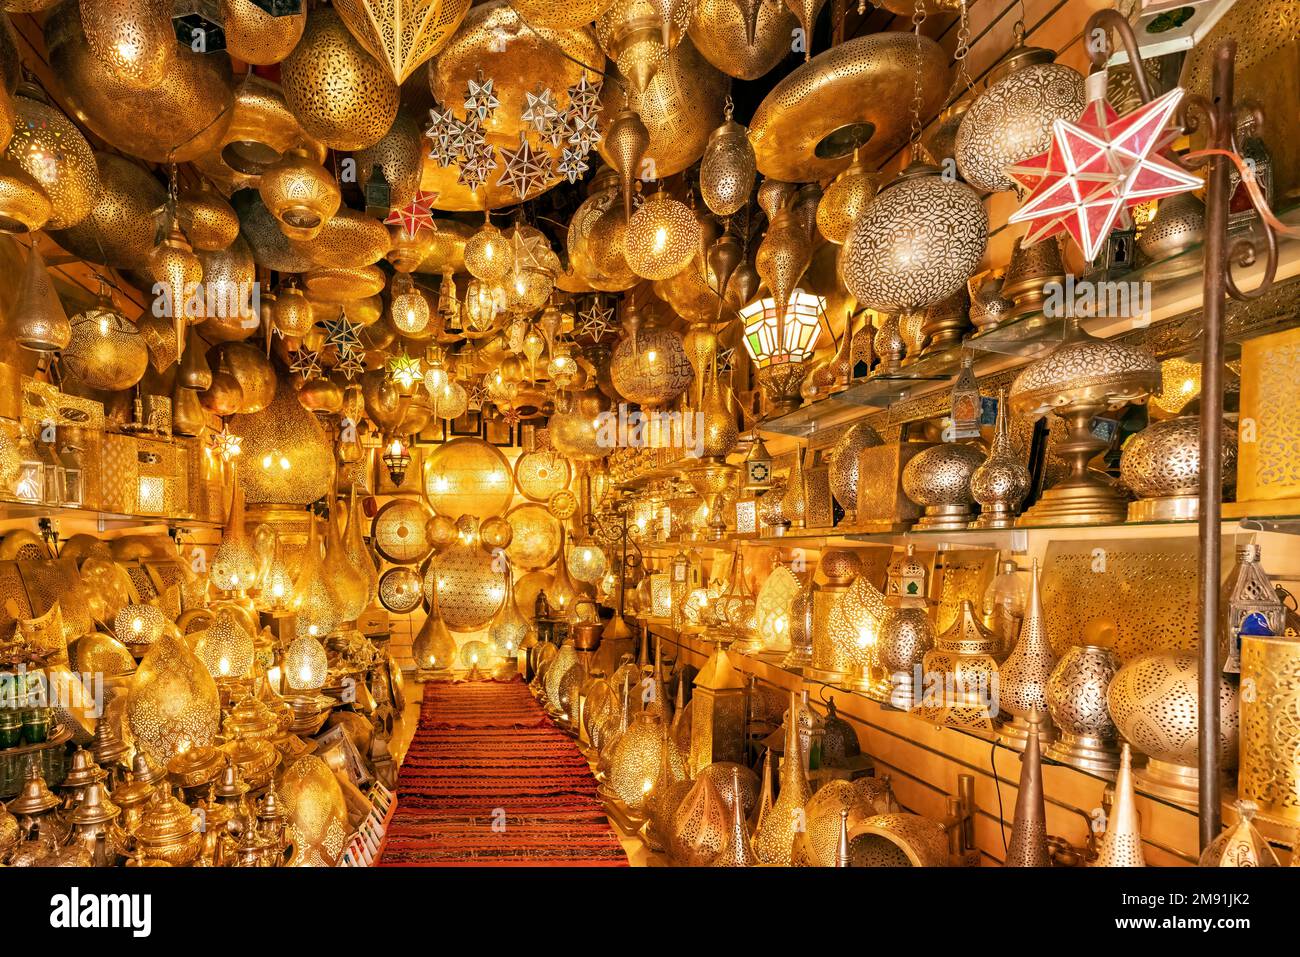 View of lighting shop in a market of marrakech, Morocco Stock Photo